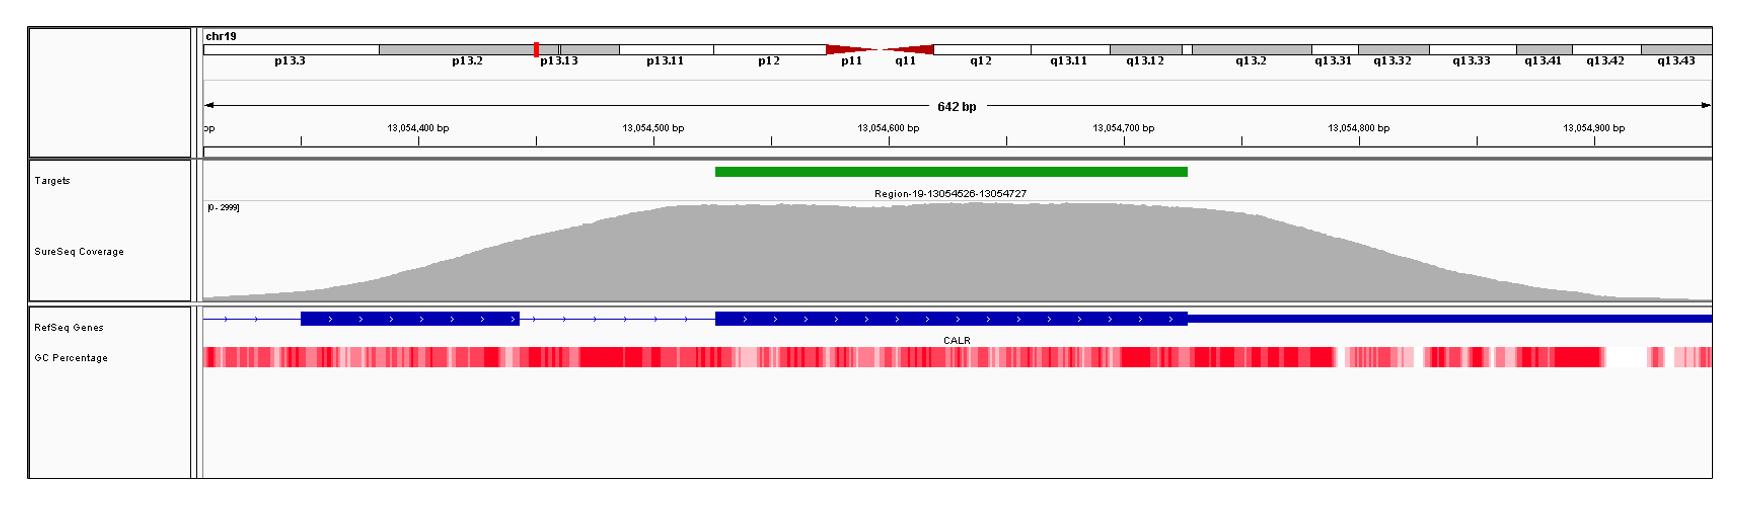 CALR Exon 9 (hg19 chr19:13054527-13055304). Depth of coverage per base (grey). Targeted region (green). Gene coding region as defined by RefSeq (blue). GC percentage (red). Image